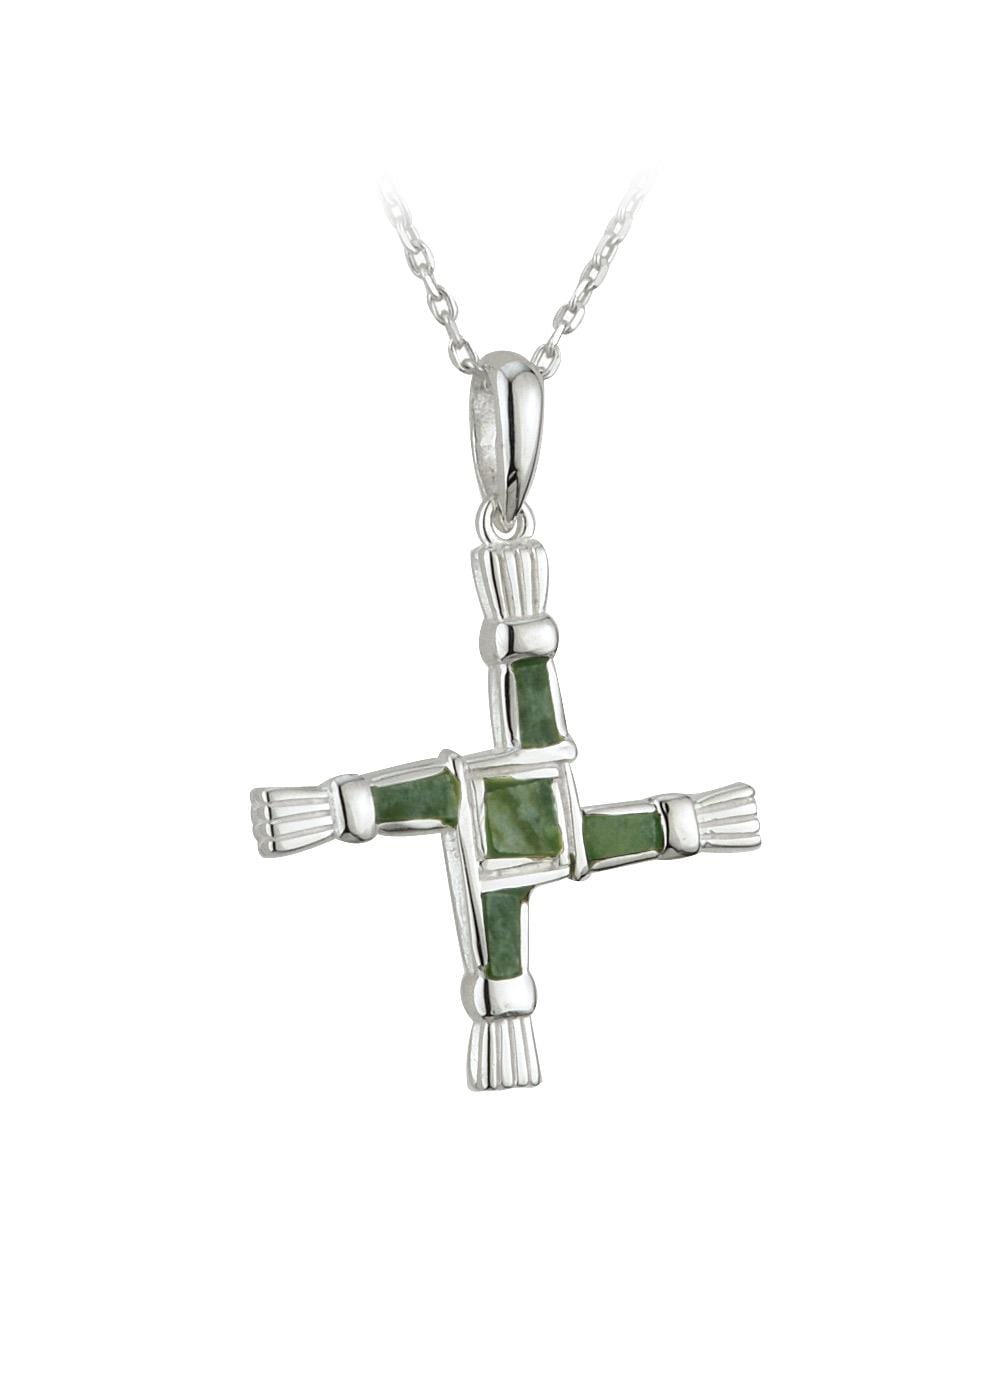 The Cross of St. Brigid is said to protect the heart & home of those who wear it